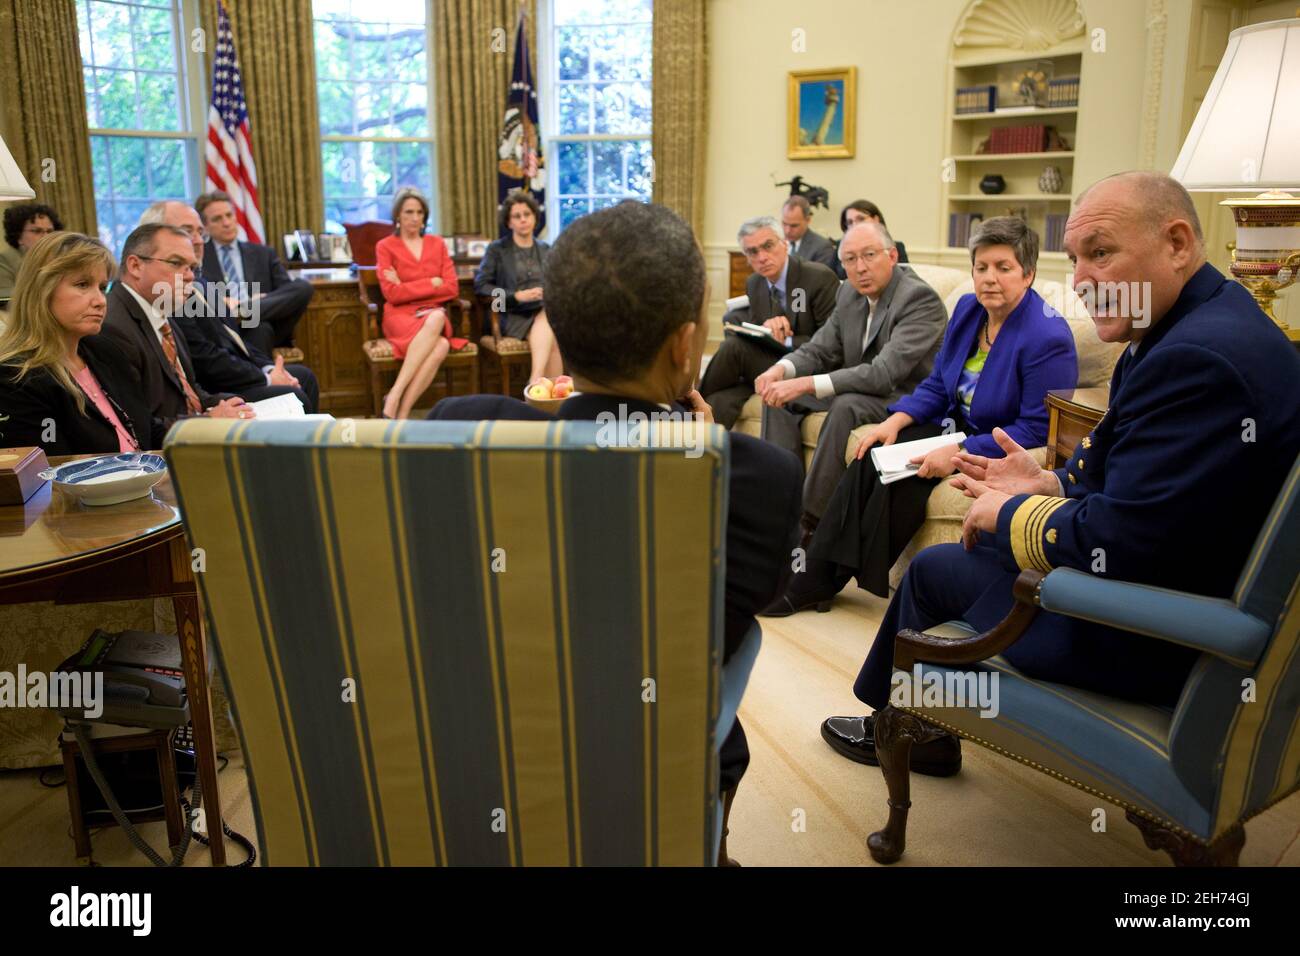 President Barack Obama meets with Admiral Thad W. Allen, Commandant of the United States Coast Guard, and other senior administration officials in the Oval Office, April 22, 2010, regarding the situation in the Gulf of Mexico. Stock Photo